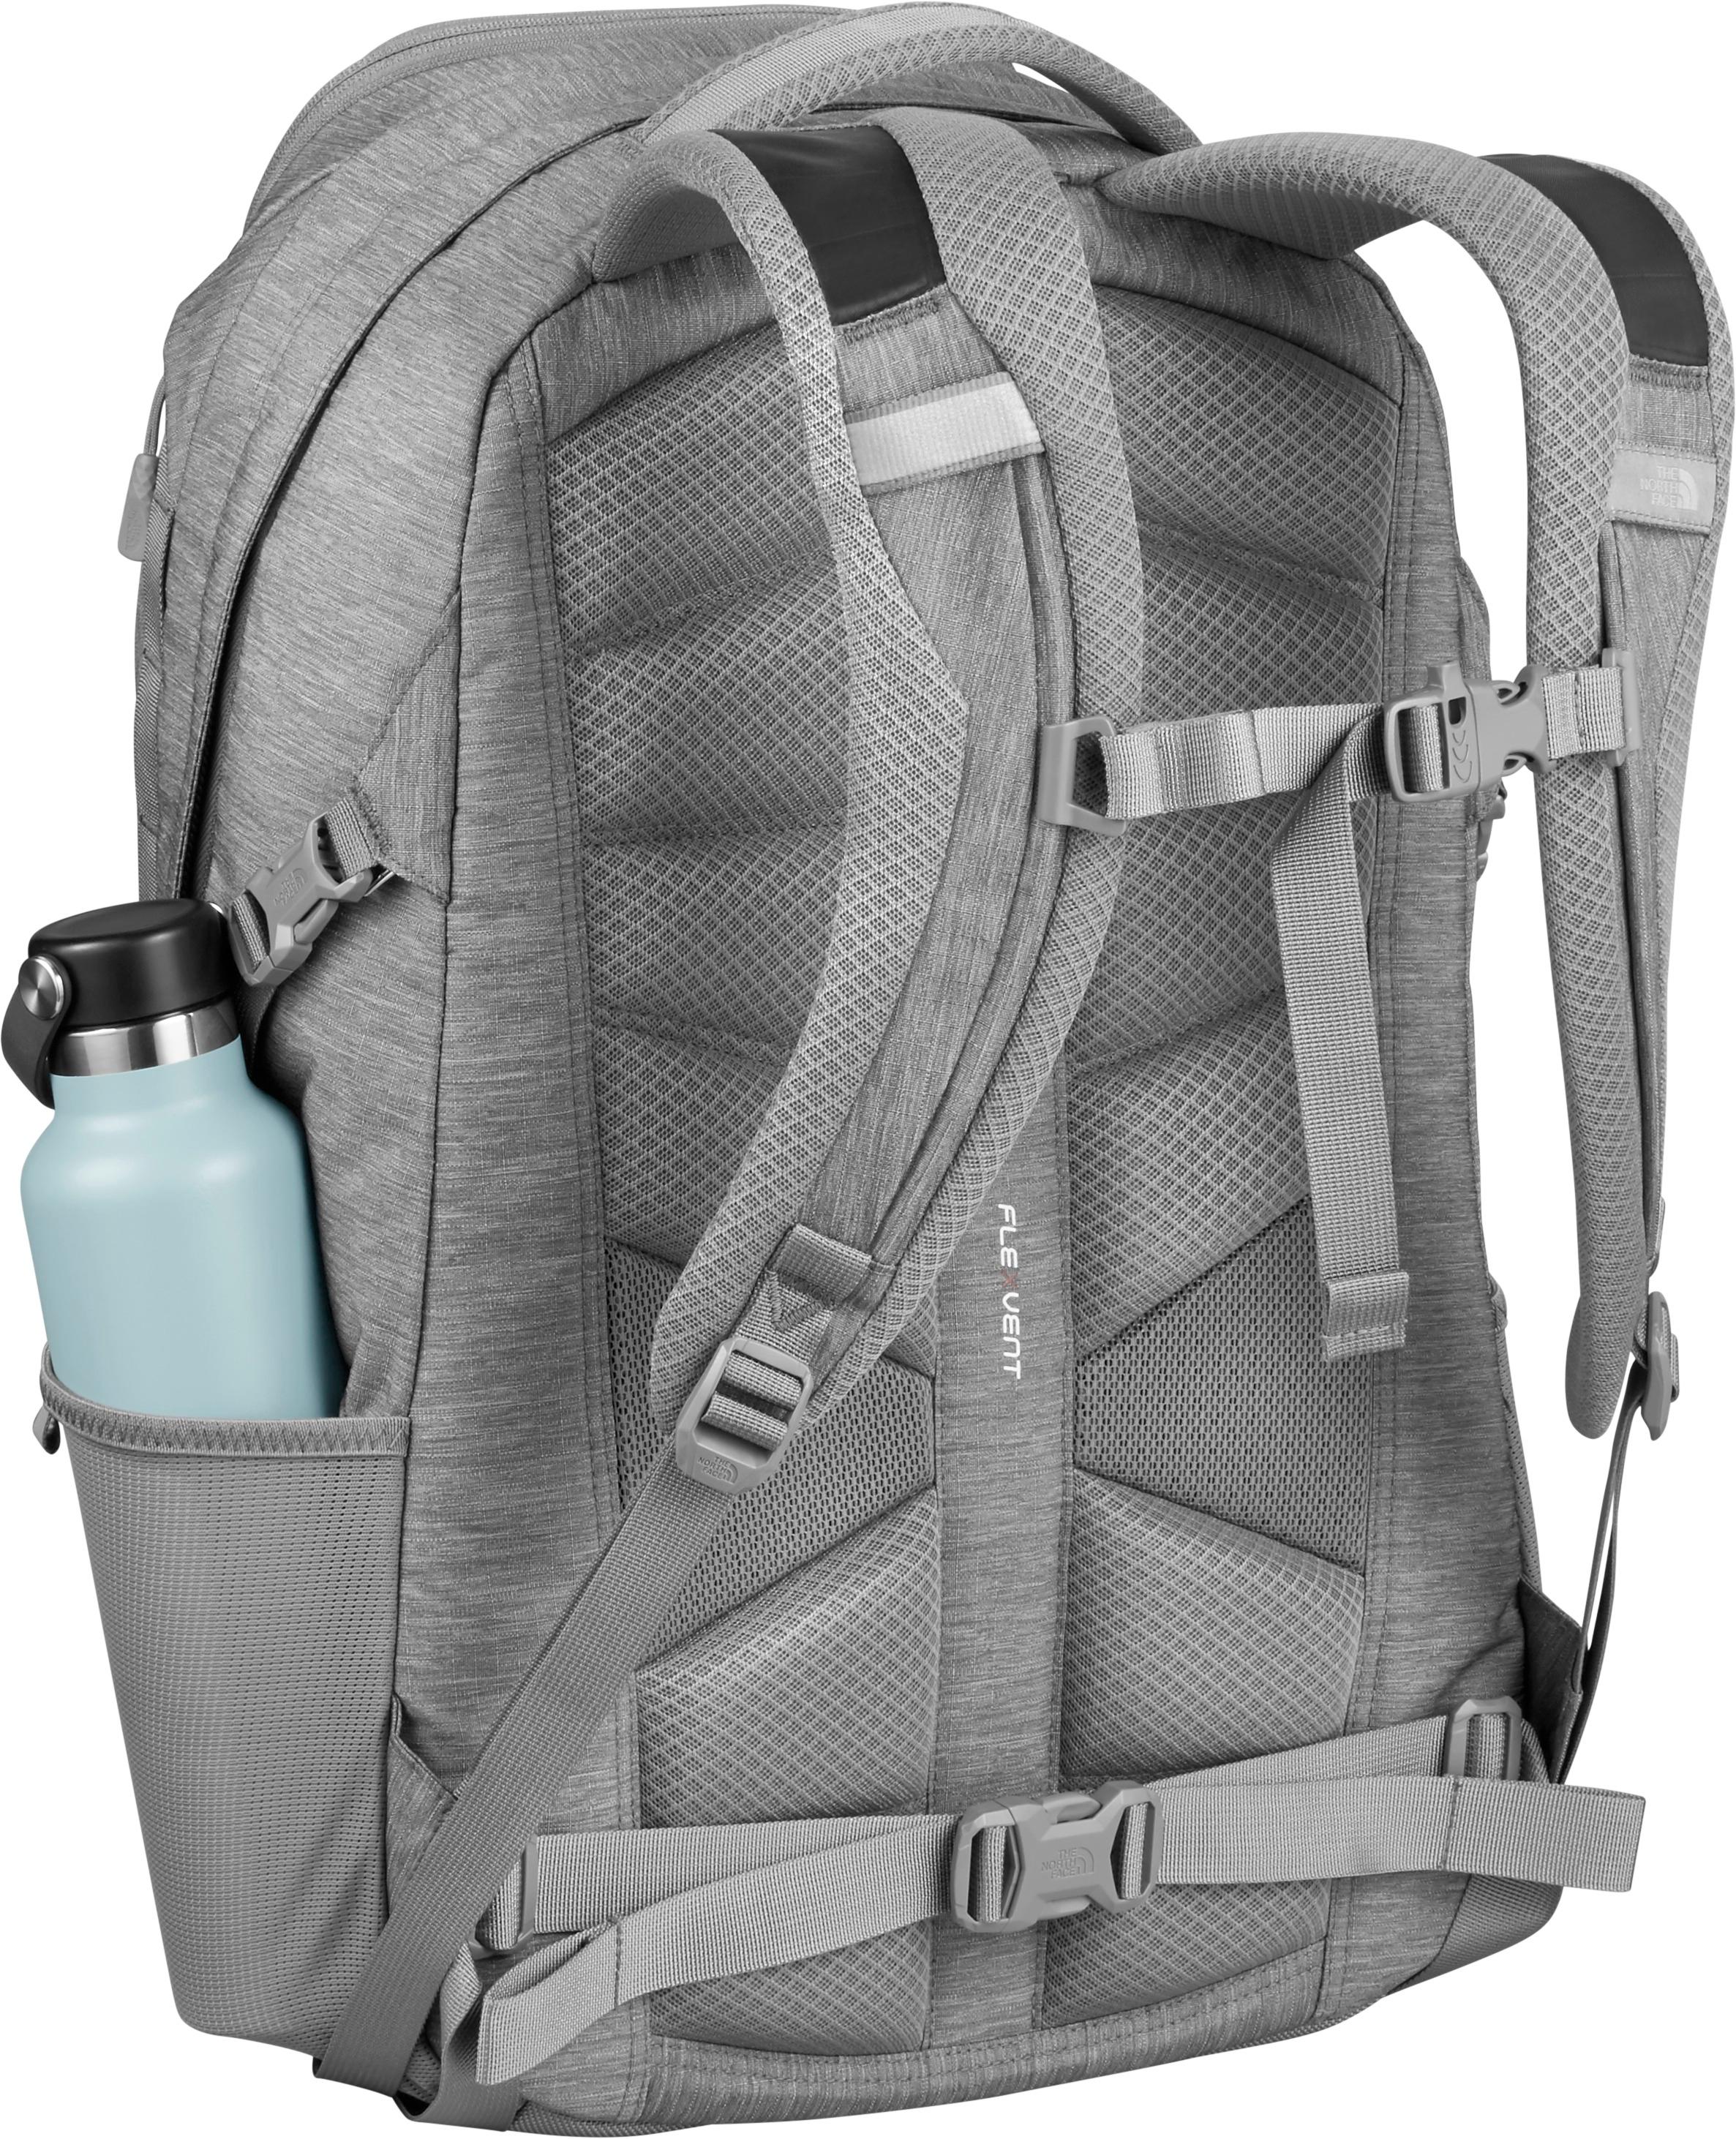 Best Buy: The North Face Mainframe Backpack Dark Gray Heather/Zinc Gray NF0A3KVWLMG